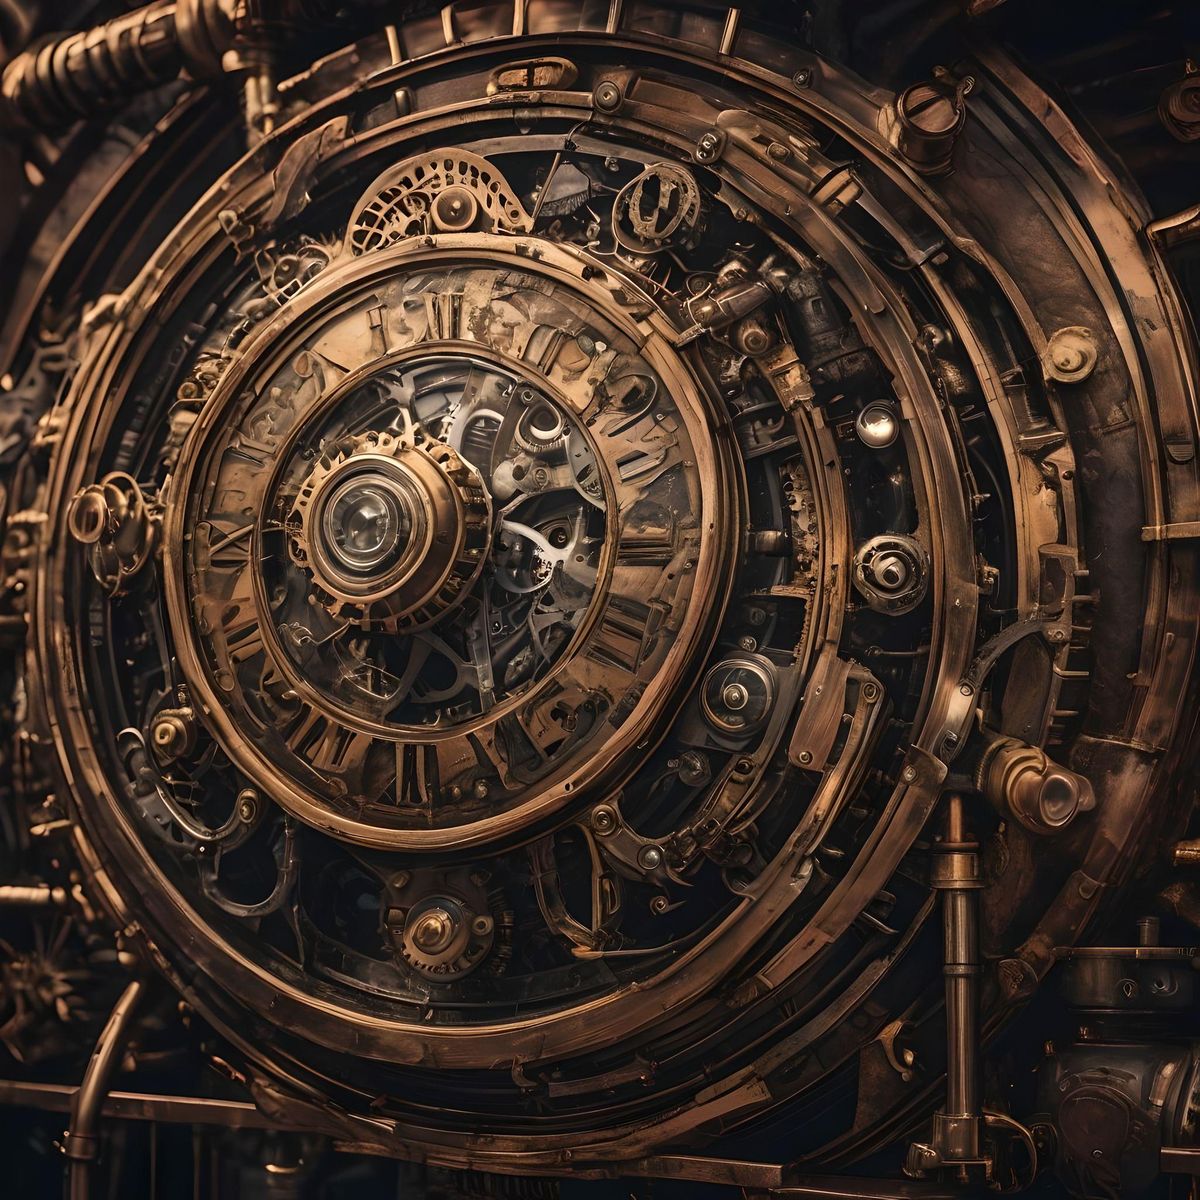 Steampunk is a subgenre of science fiction that combines history, fantasy, and technology, often featuring steam-powered machinery from the 19th century